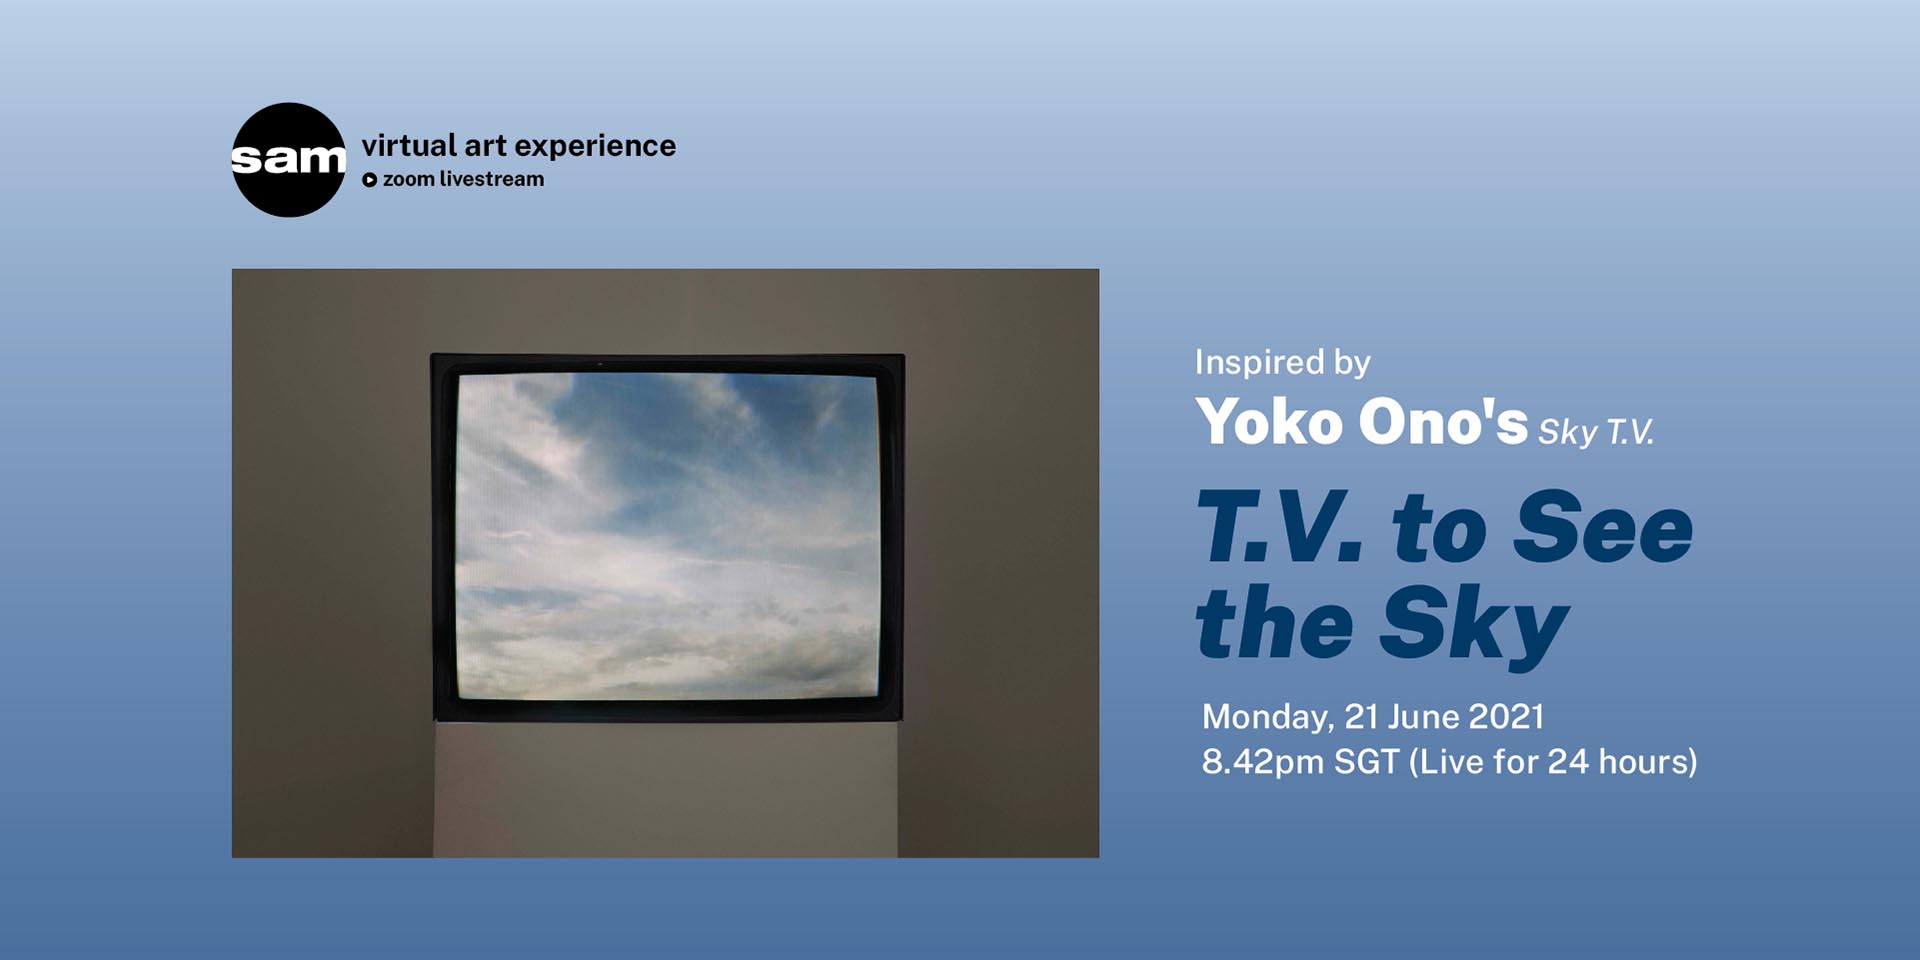 T.V. to See the Sky: Inspired by Yoko Ono’s 'Sky T.V.'